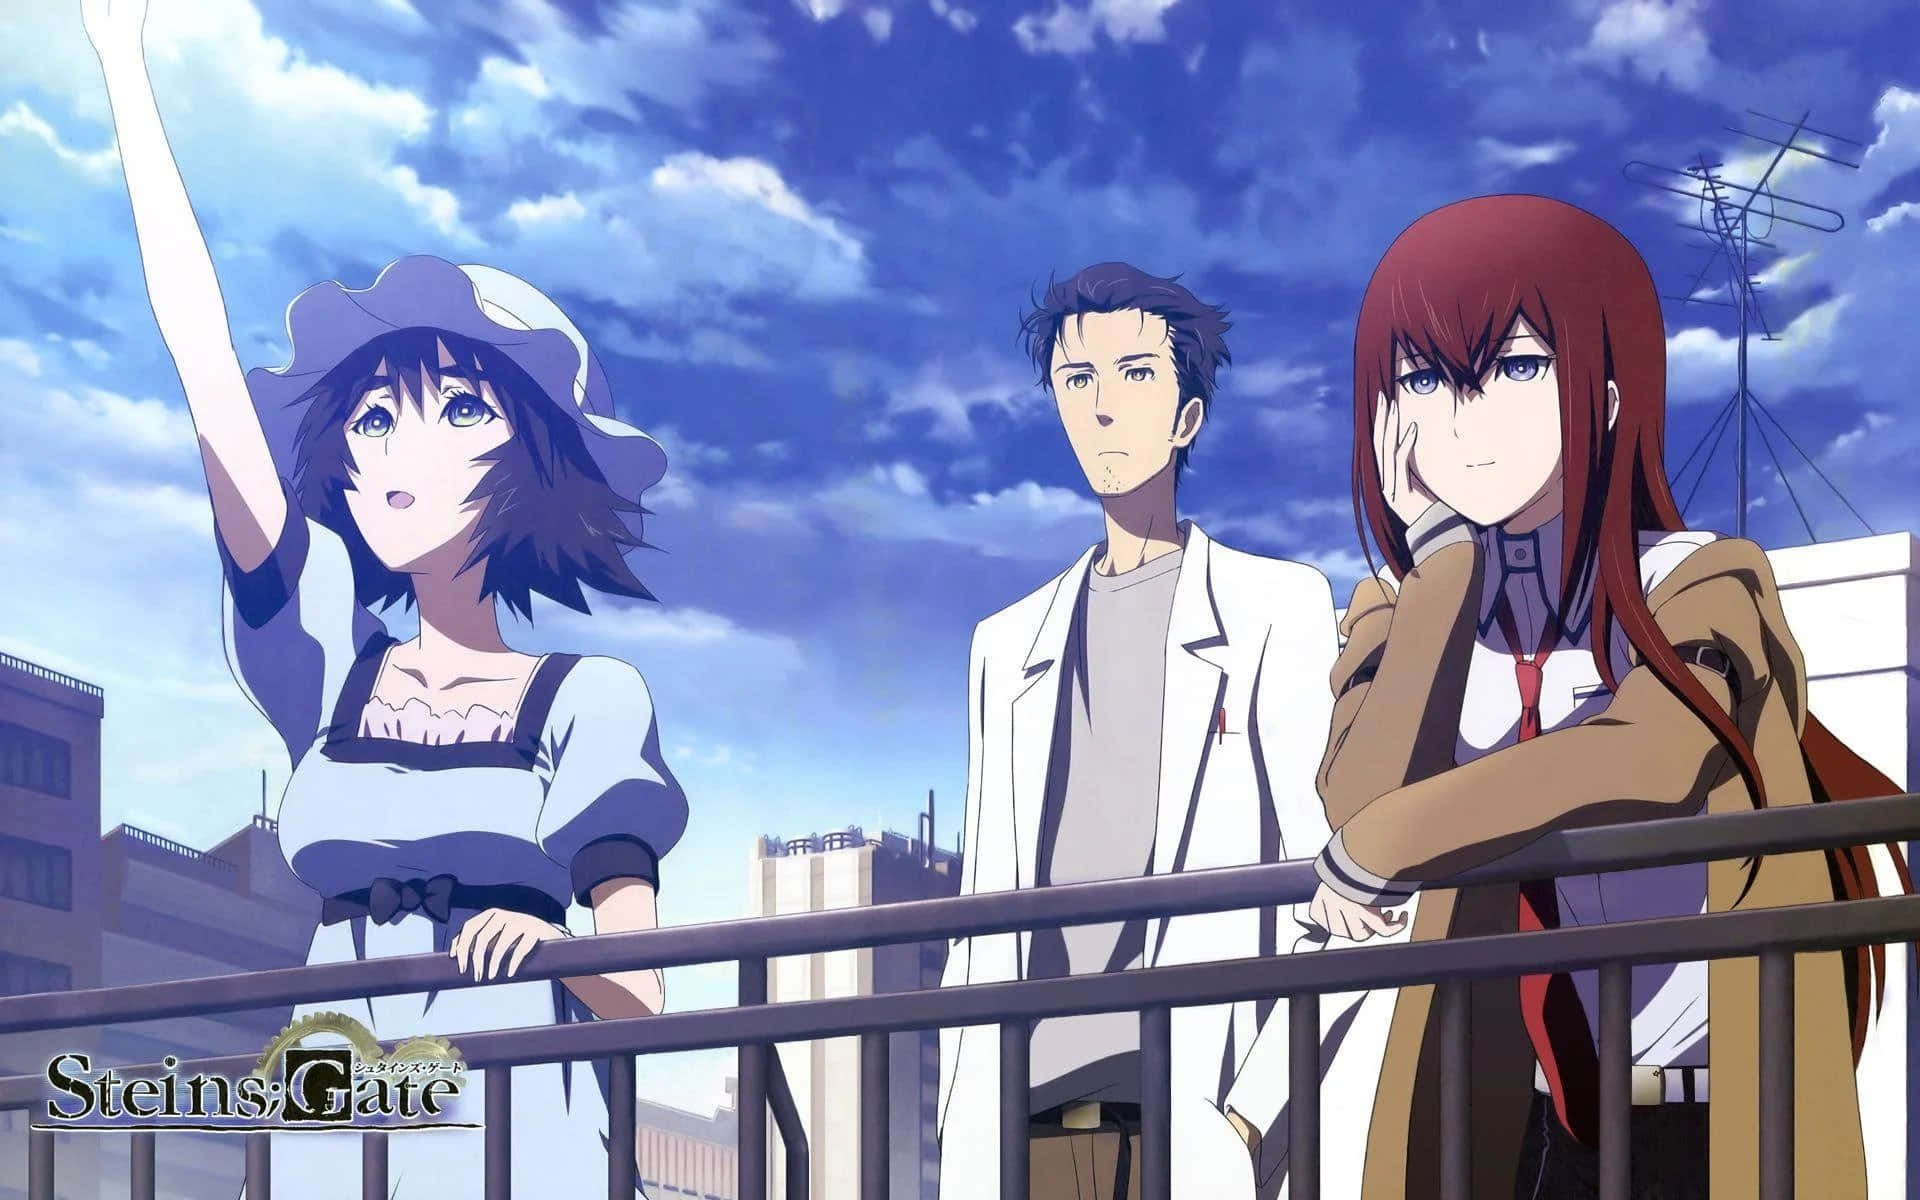 "Explore the boundaries of time travel with Steins:Gate!"